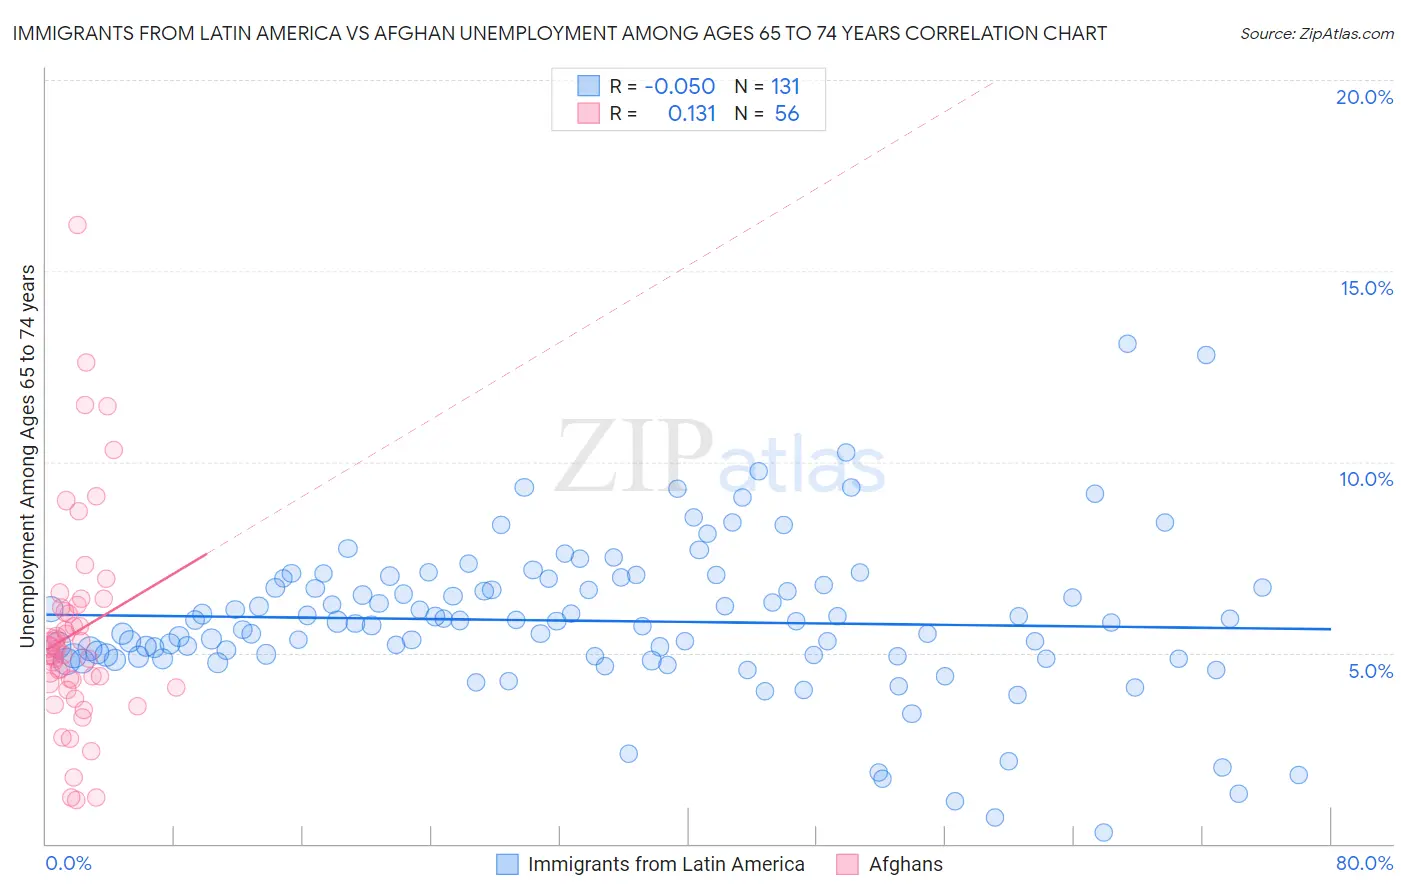 Immigrants from Latin America vs Afghan Unemployment Among Ages 65 to 74 years